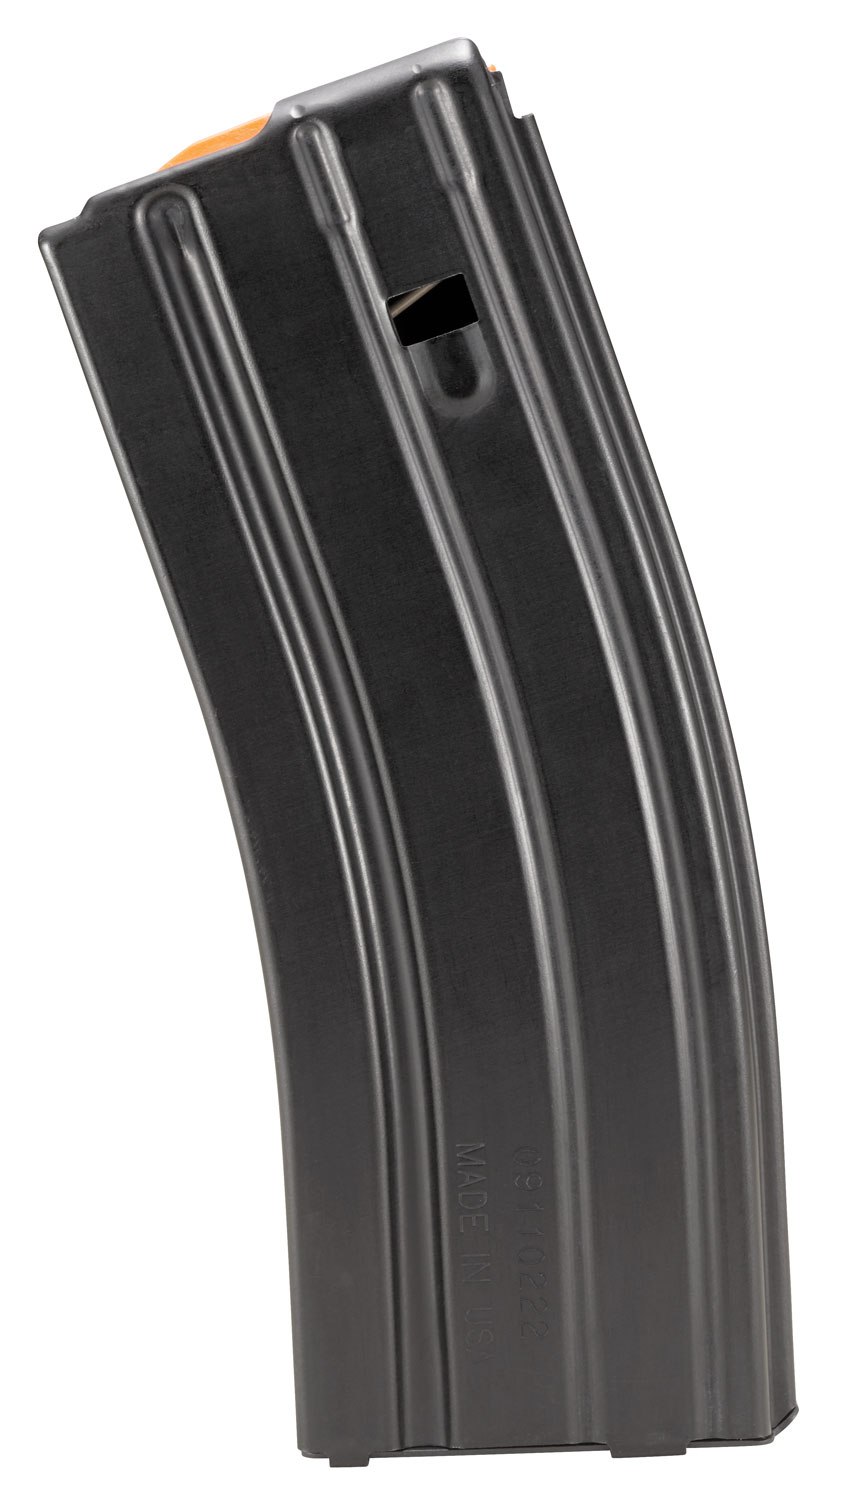 DuraMag 3023001178CP Speed Replacement Magazine Black with Orange Follower Detachable 30rd 223 Rem, 300 Blackout, 5.56x45mm NATO for AR-15